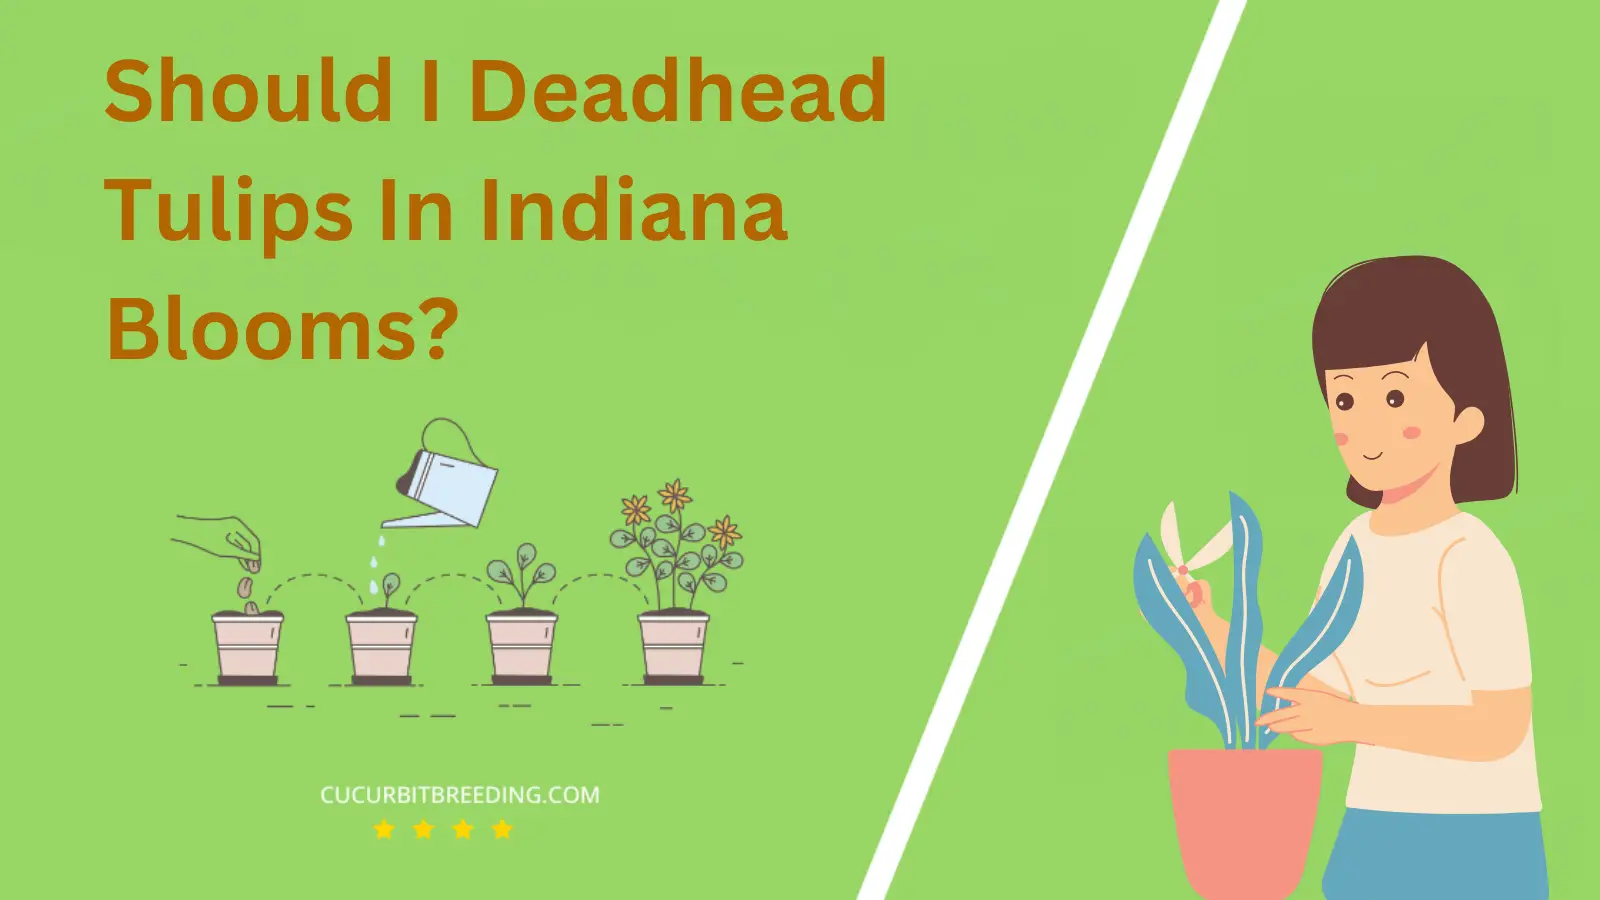 Should I Deadhead Tulips In Indiana Blooms?